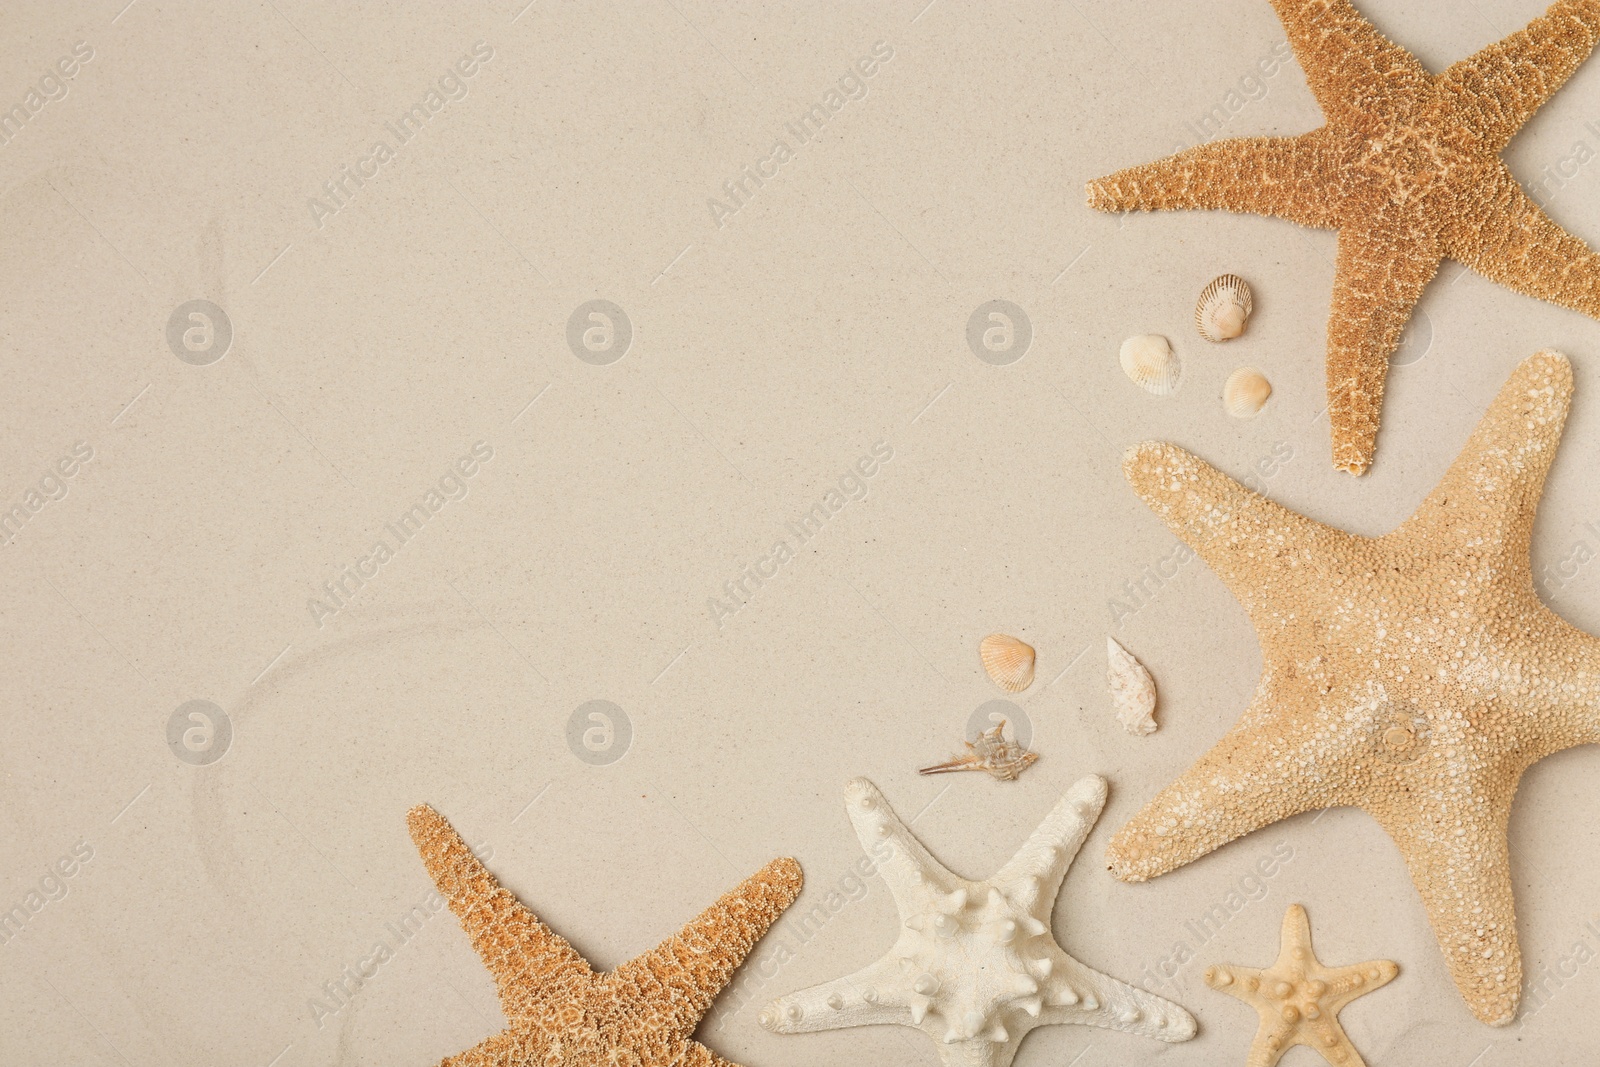 Photo of Seashells and starfishes on beach sand, top view with space for text